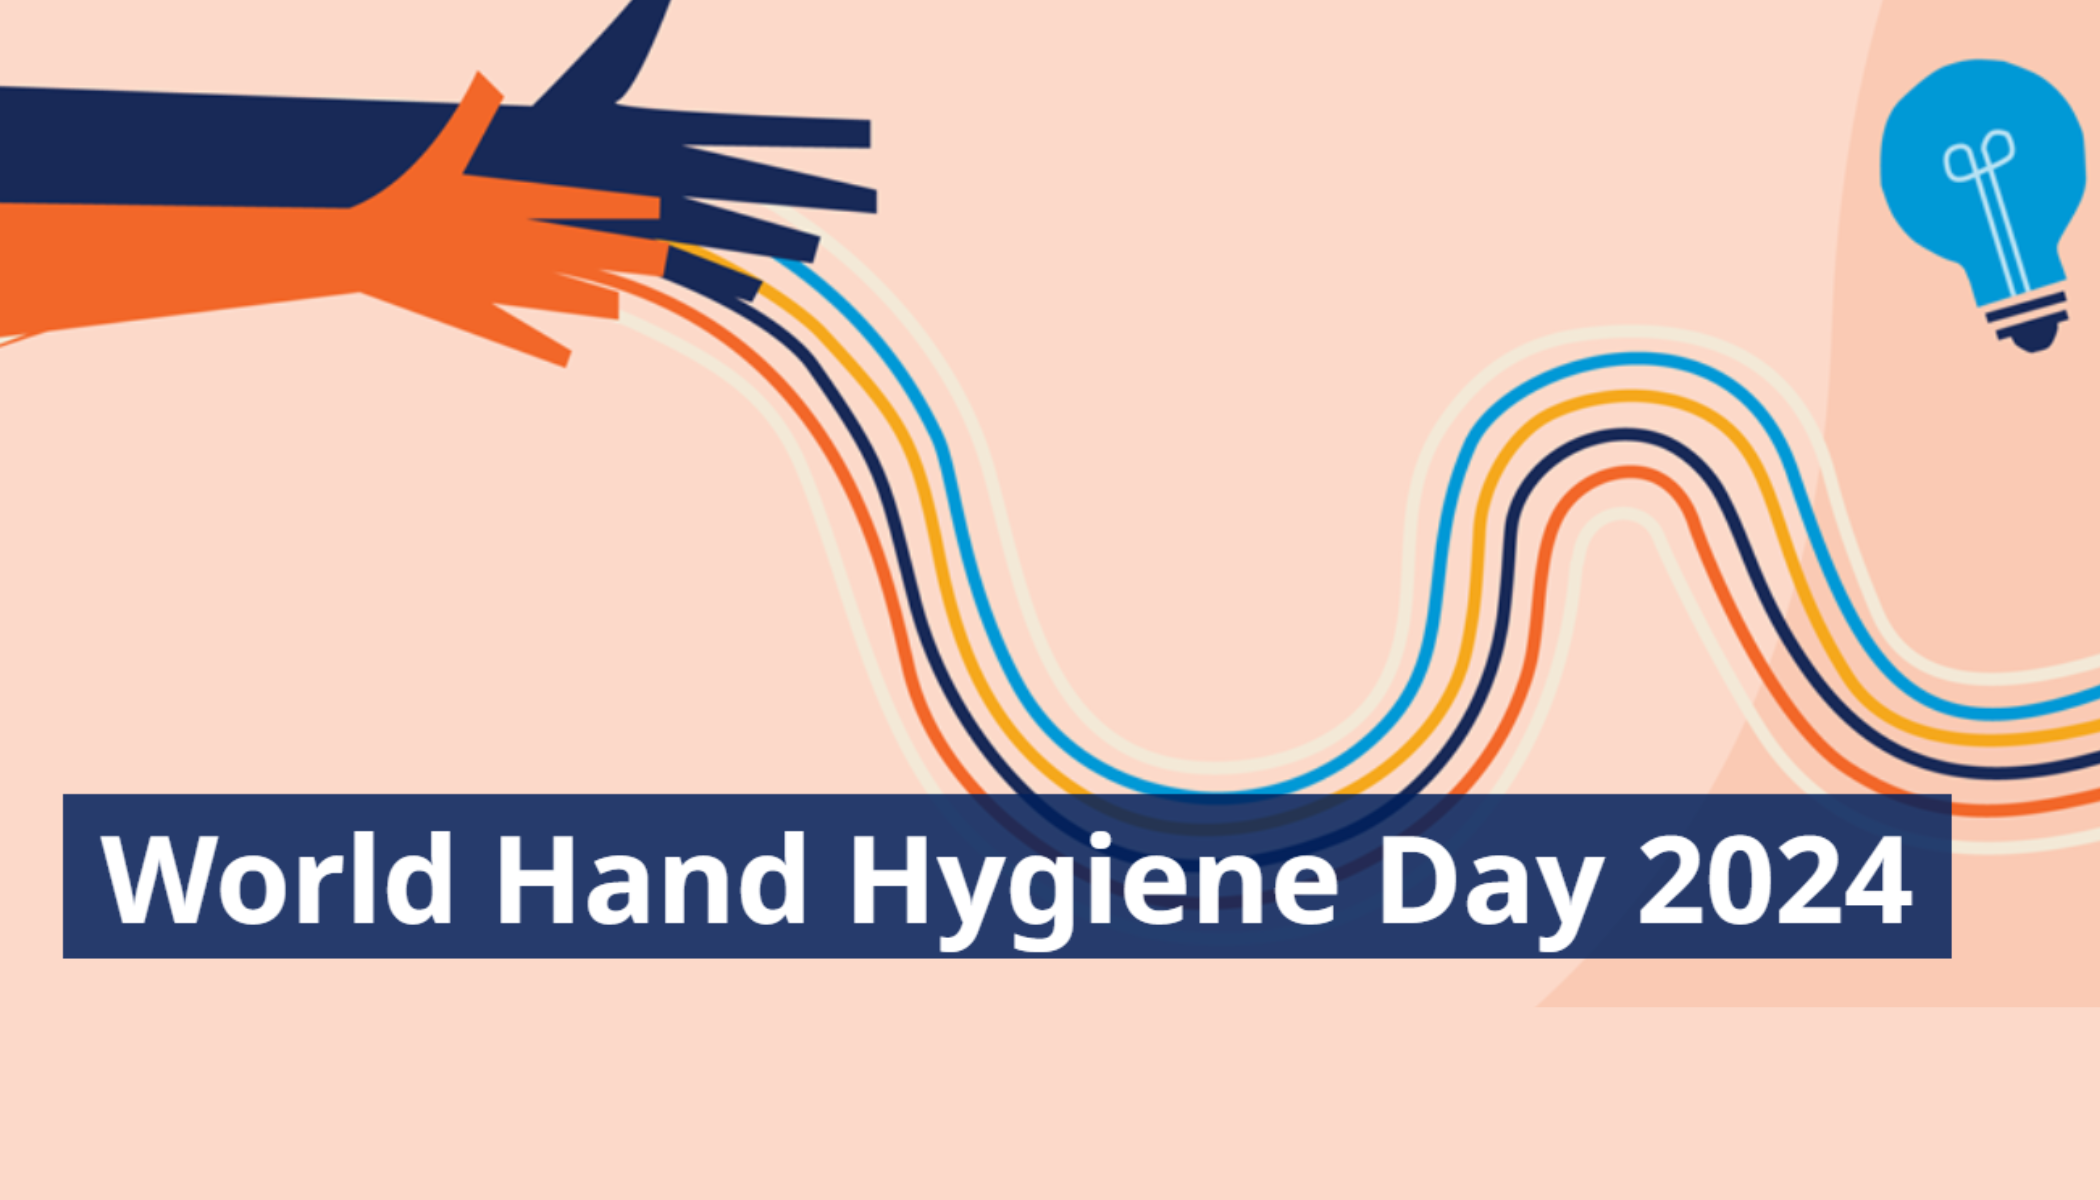 Sharing Knowledge to Save Lives on World Hand Hygiene Day